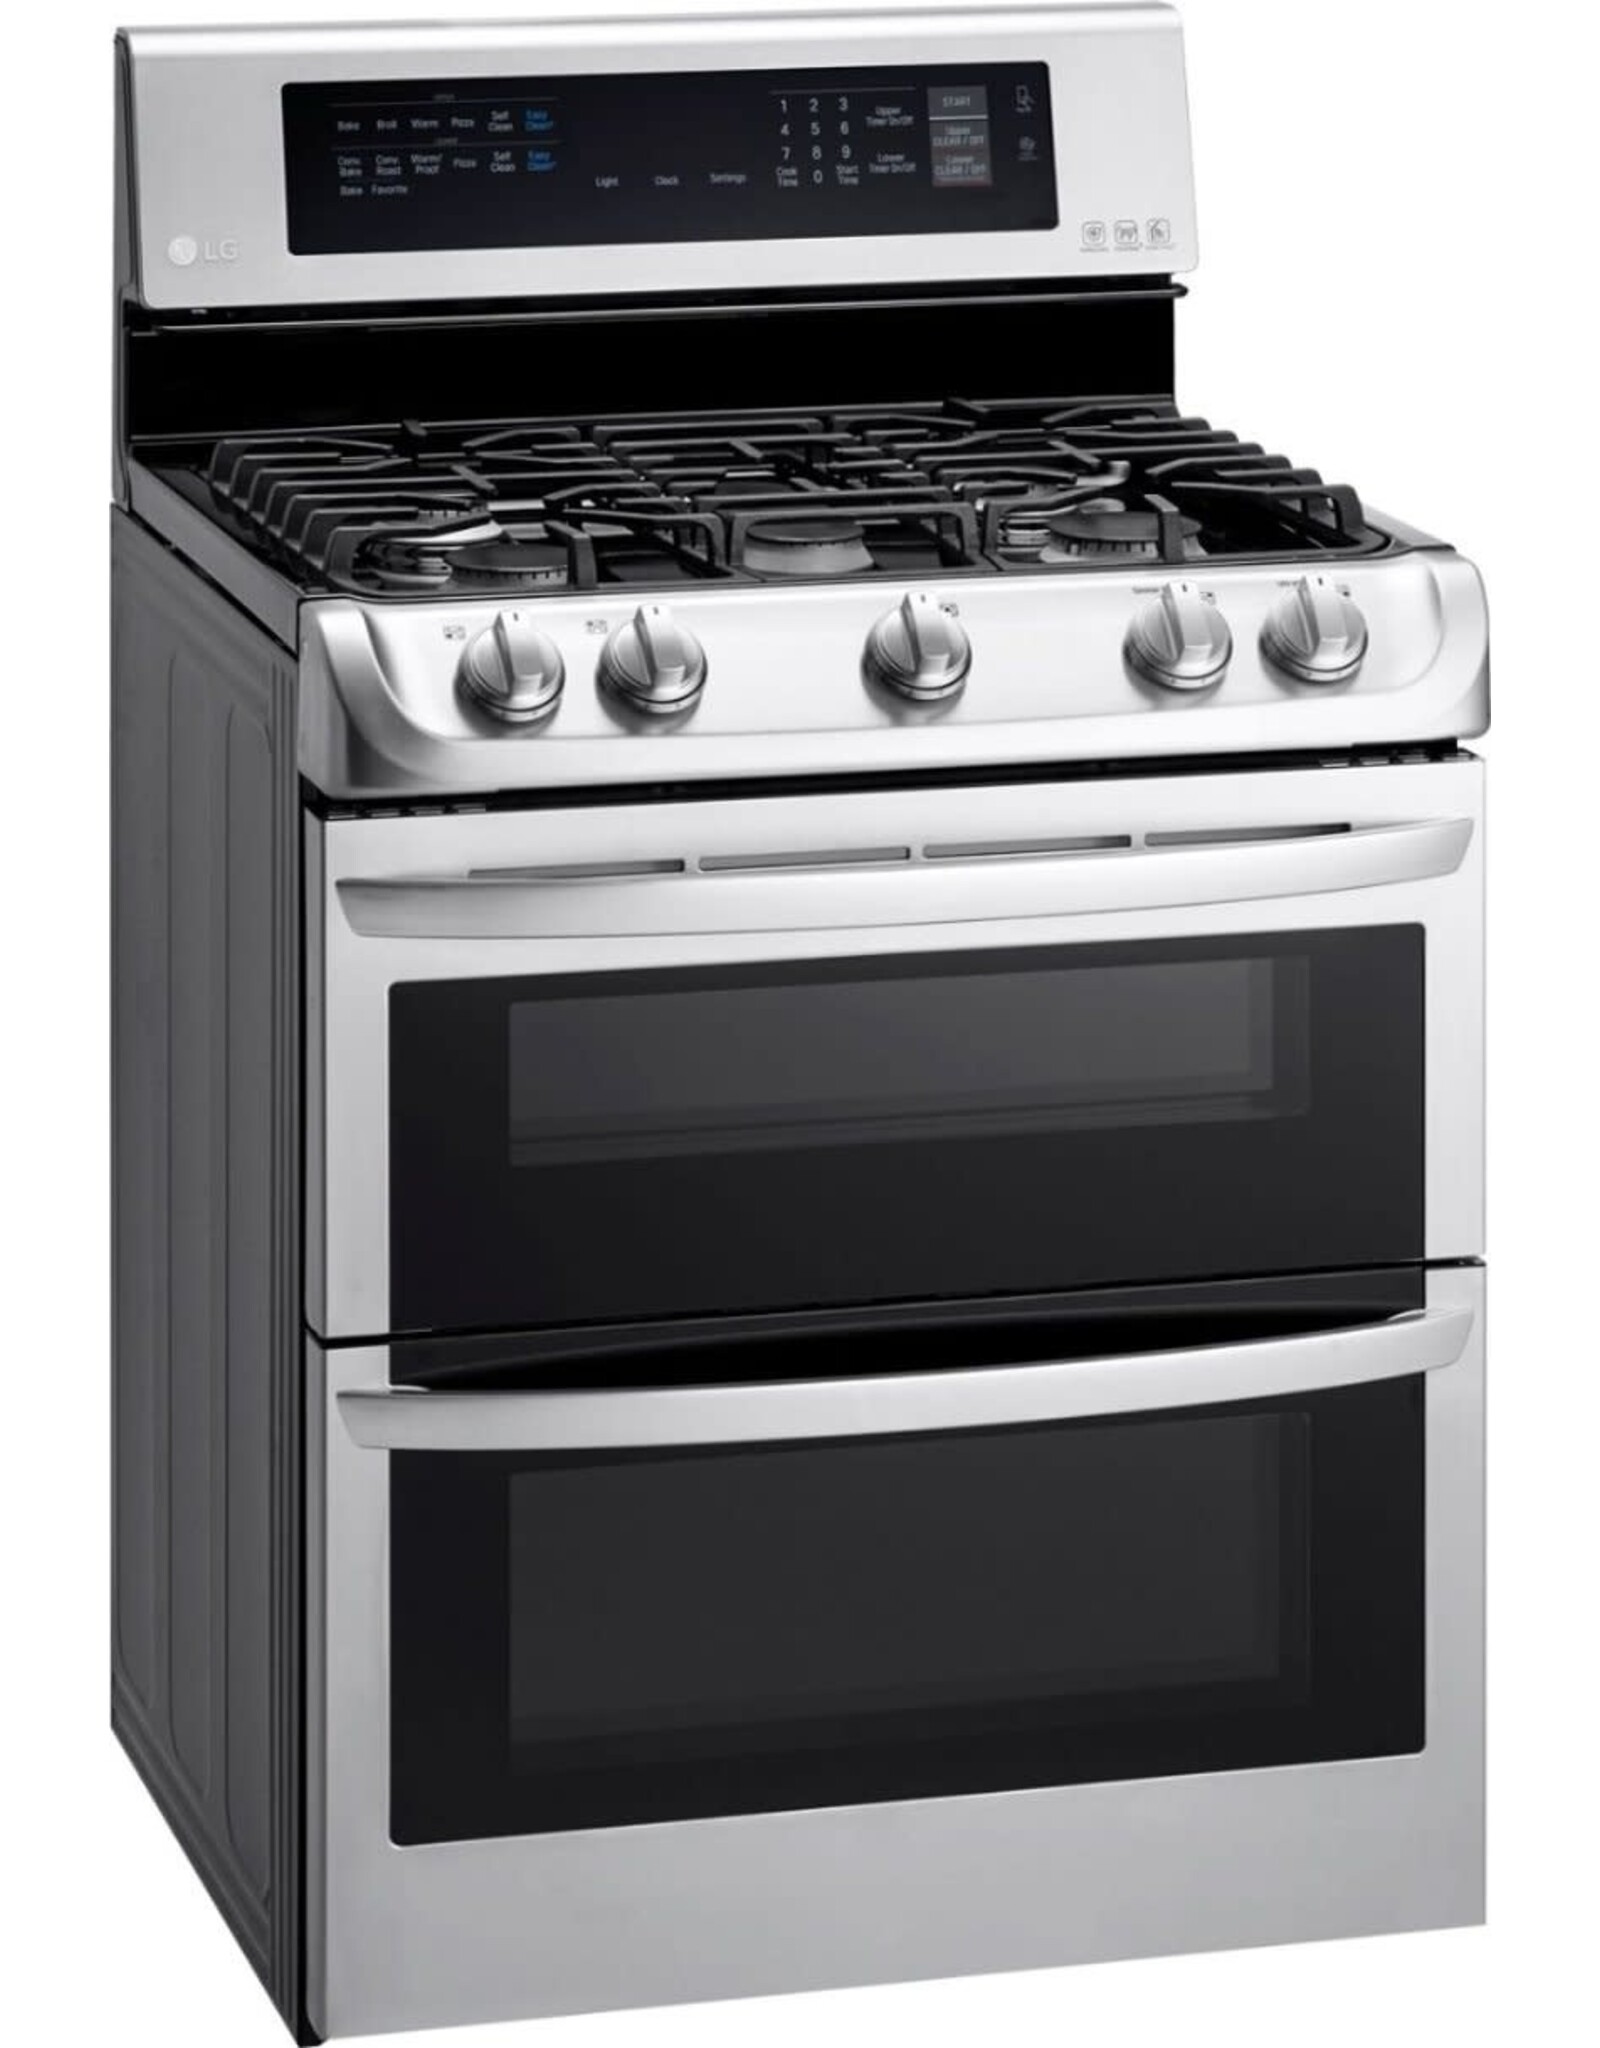 LG Electronics LDG4313ST 6.9 cu. ft. Double Oven Gas Range with ProBake Convection Oven, Self Clean and EasyClean in Stainless Steel